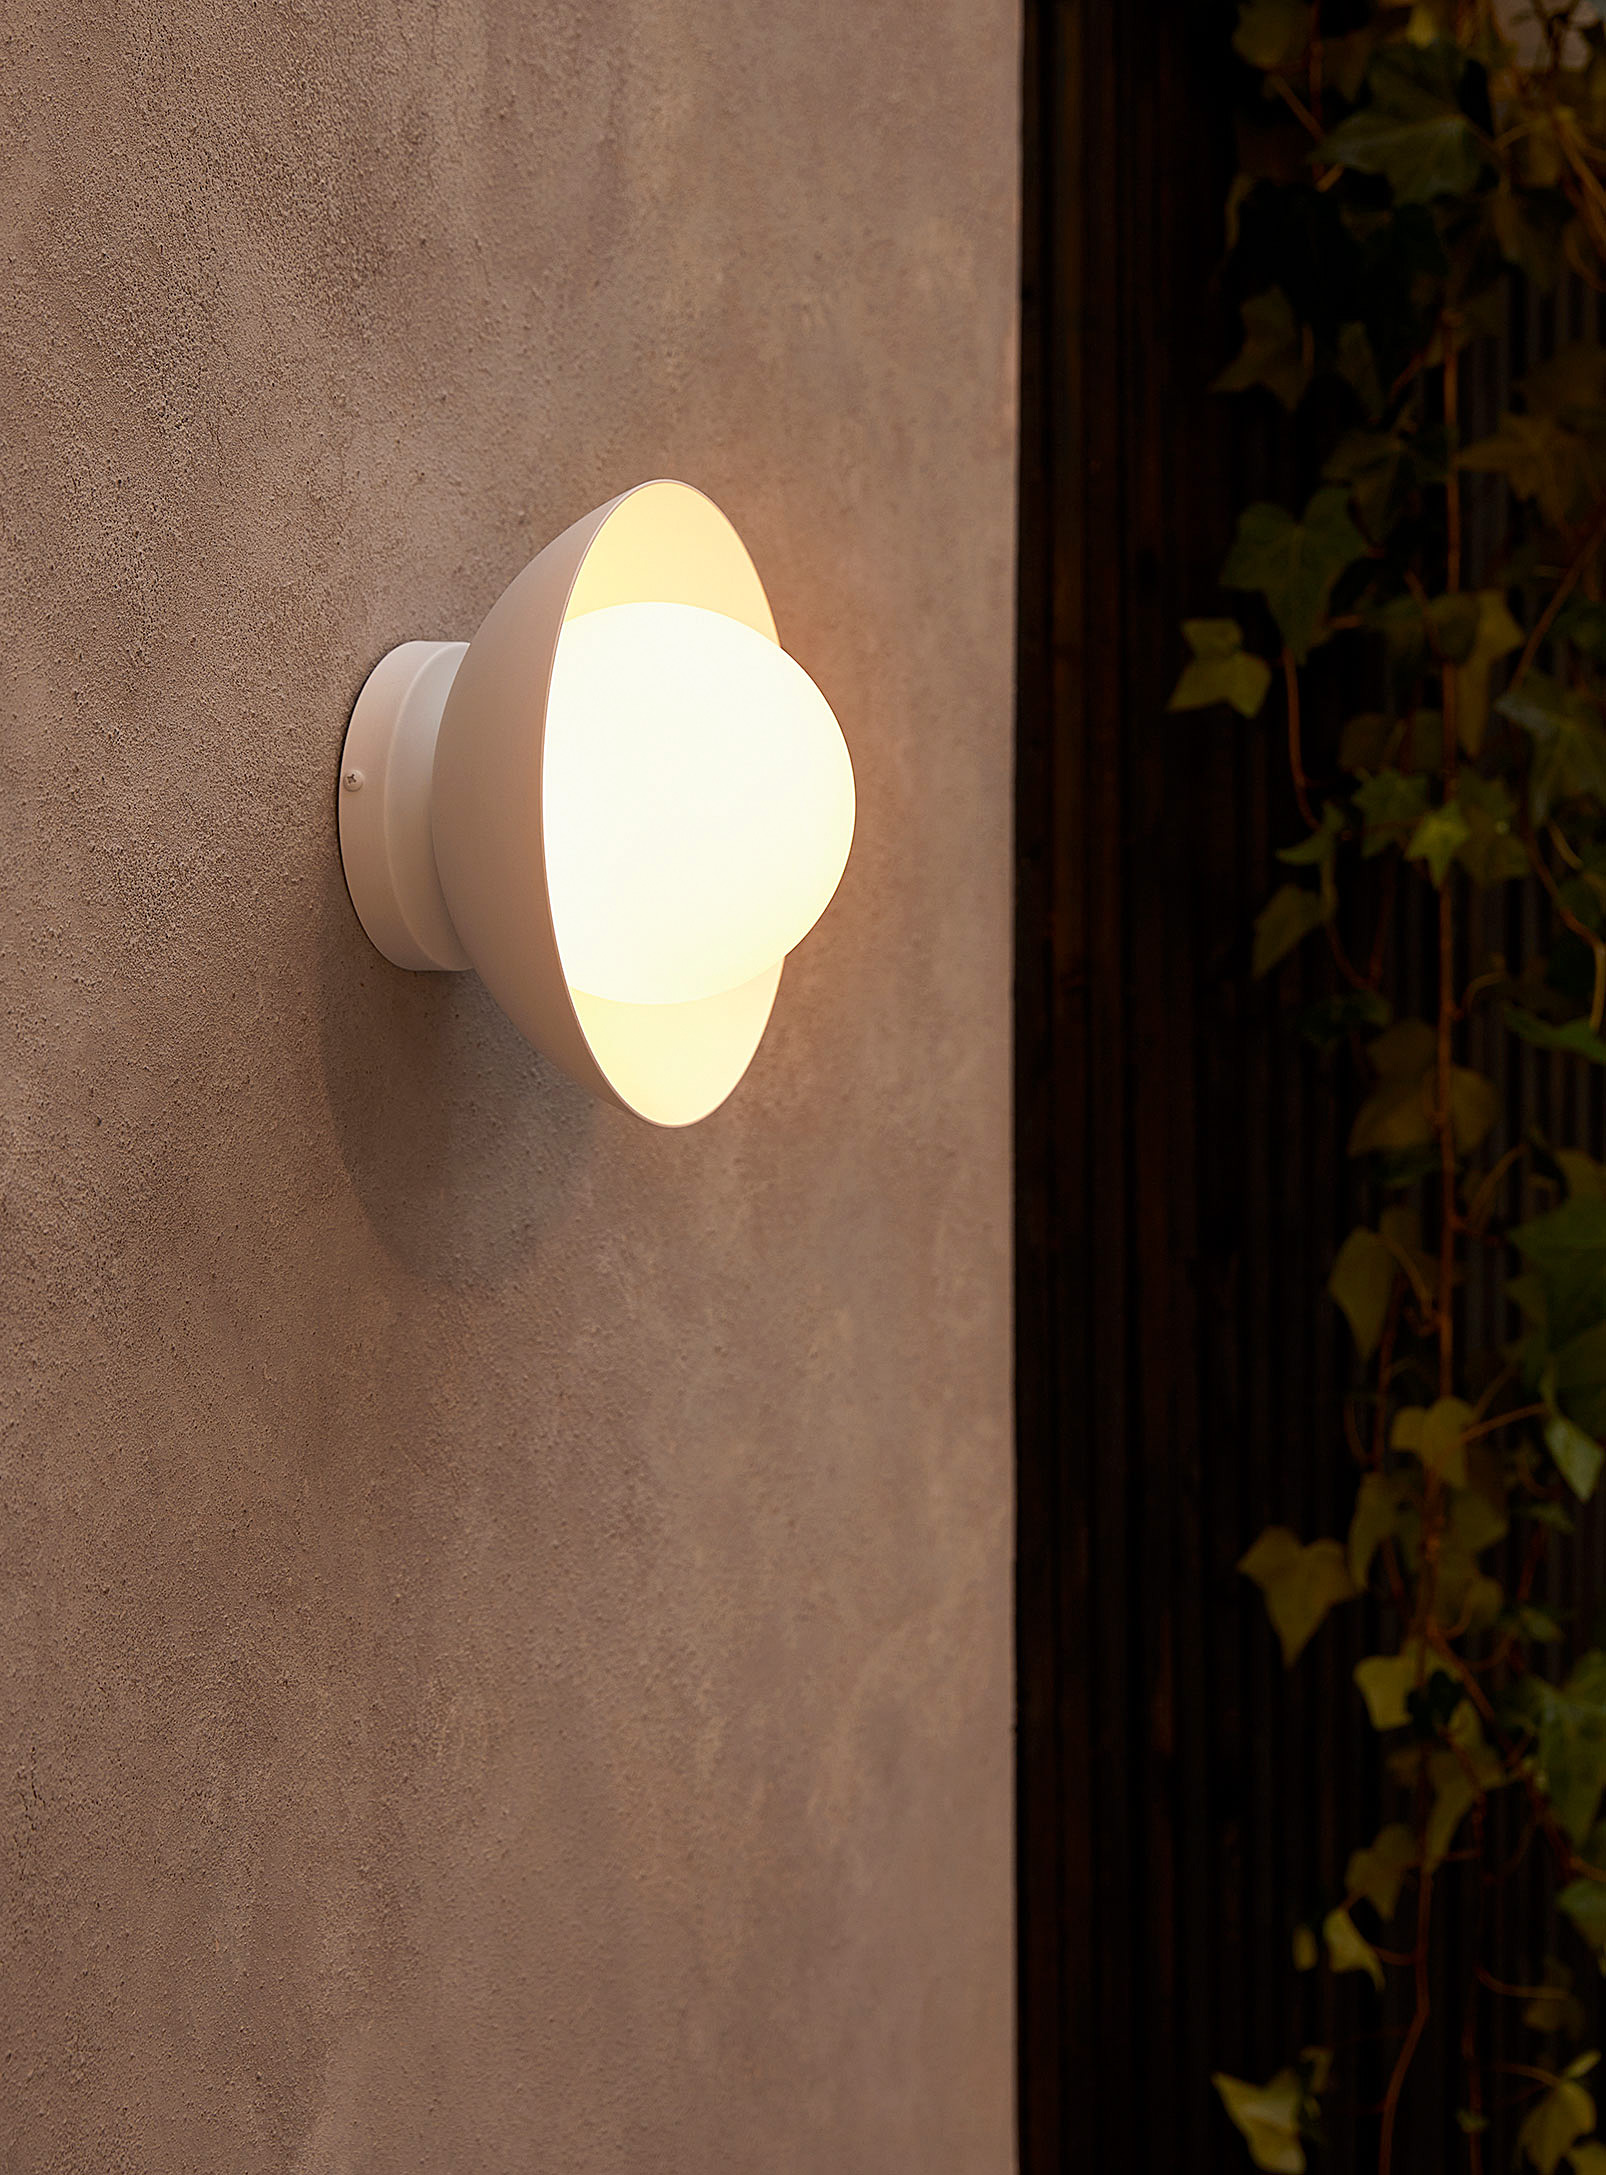 Luminaire Authentik Small Danoise Indoor And Outdoor Light Fixture In White